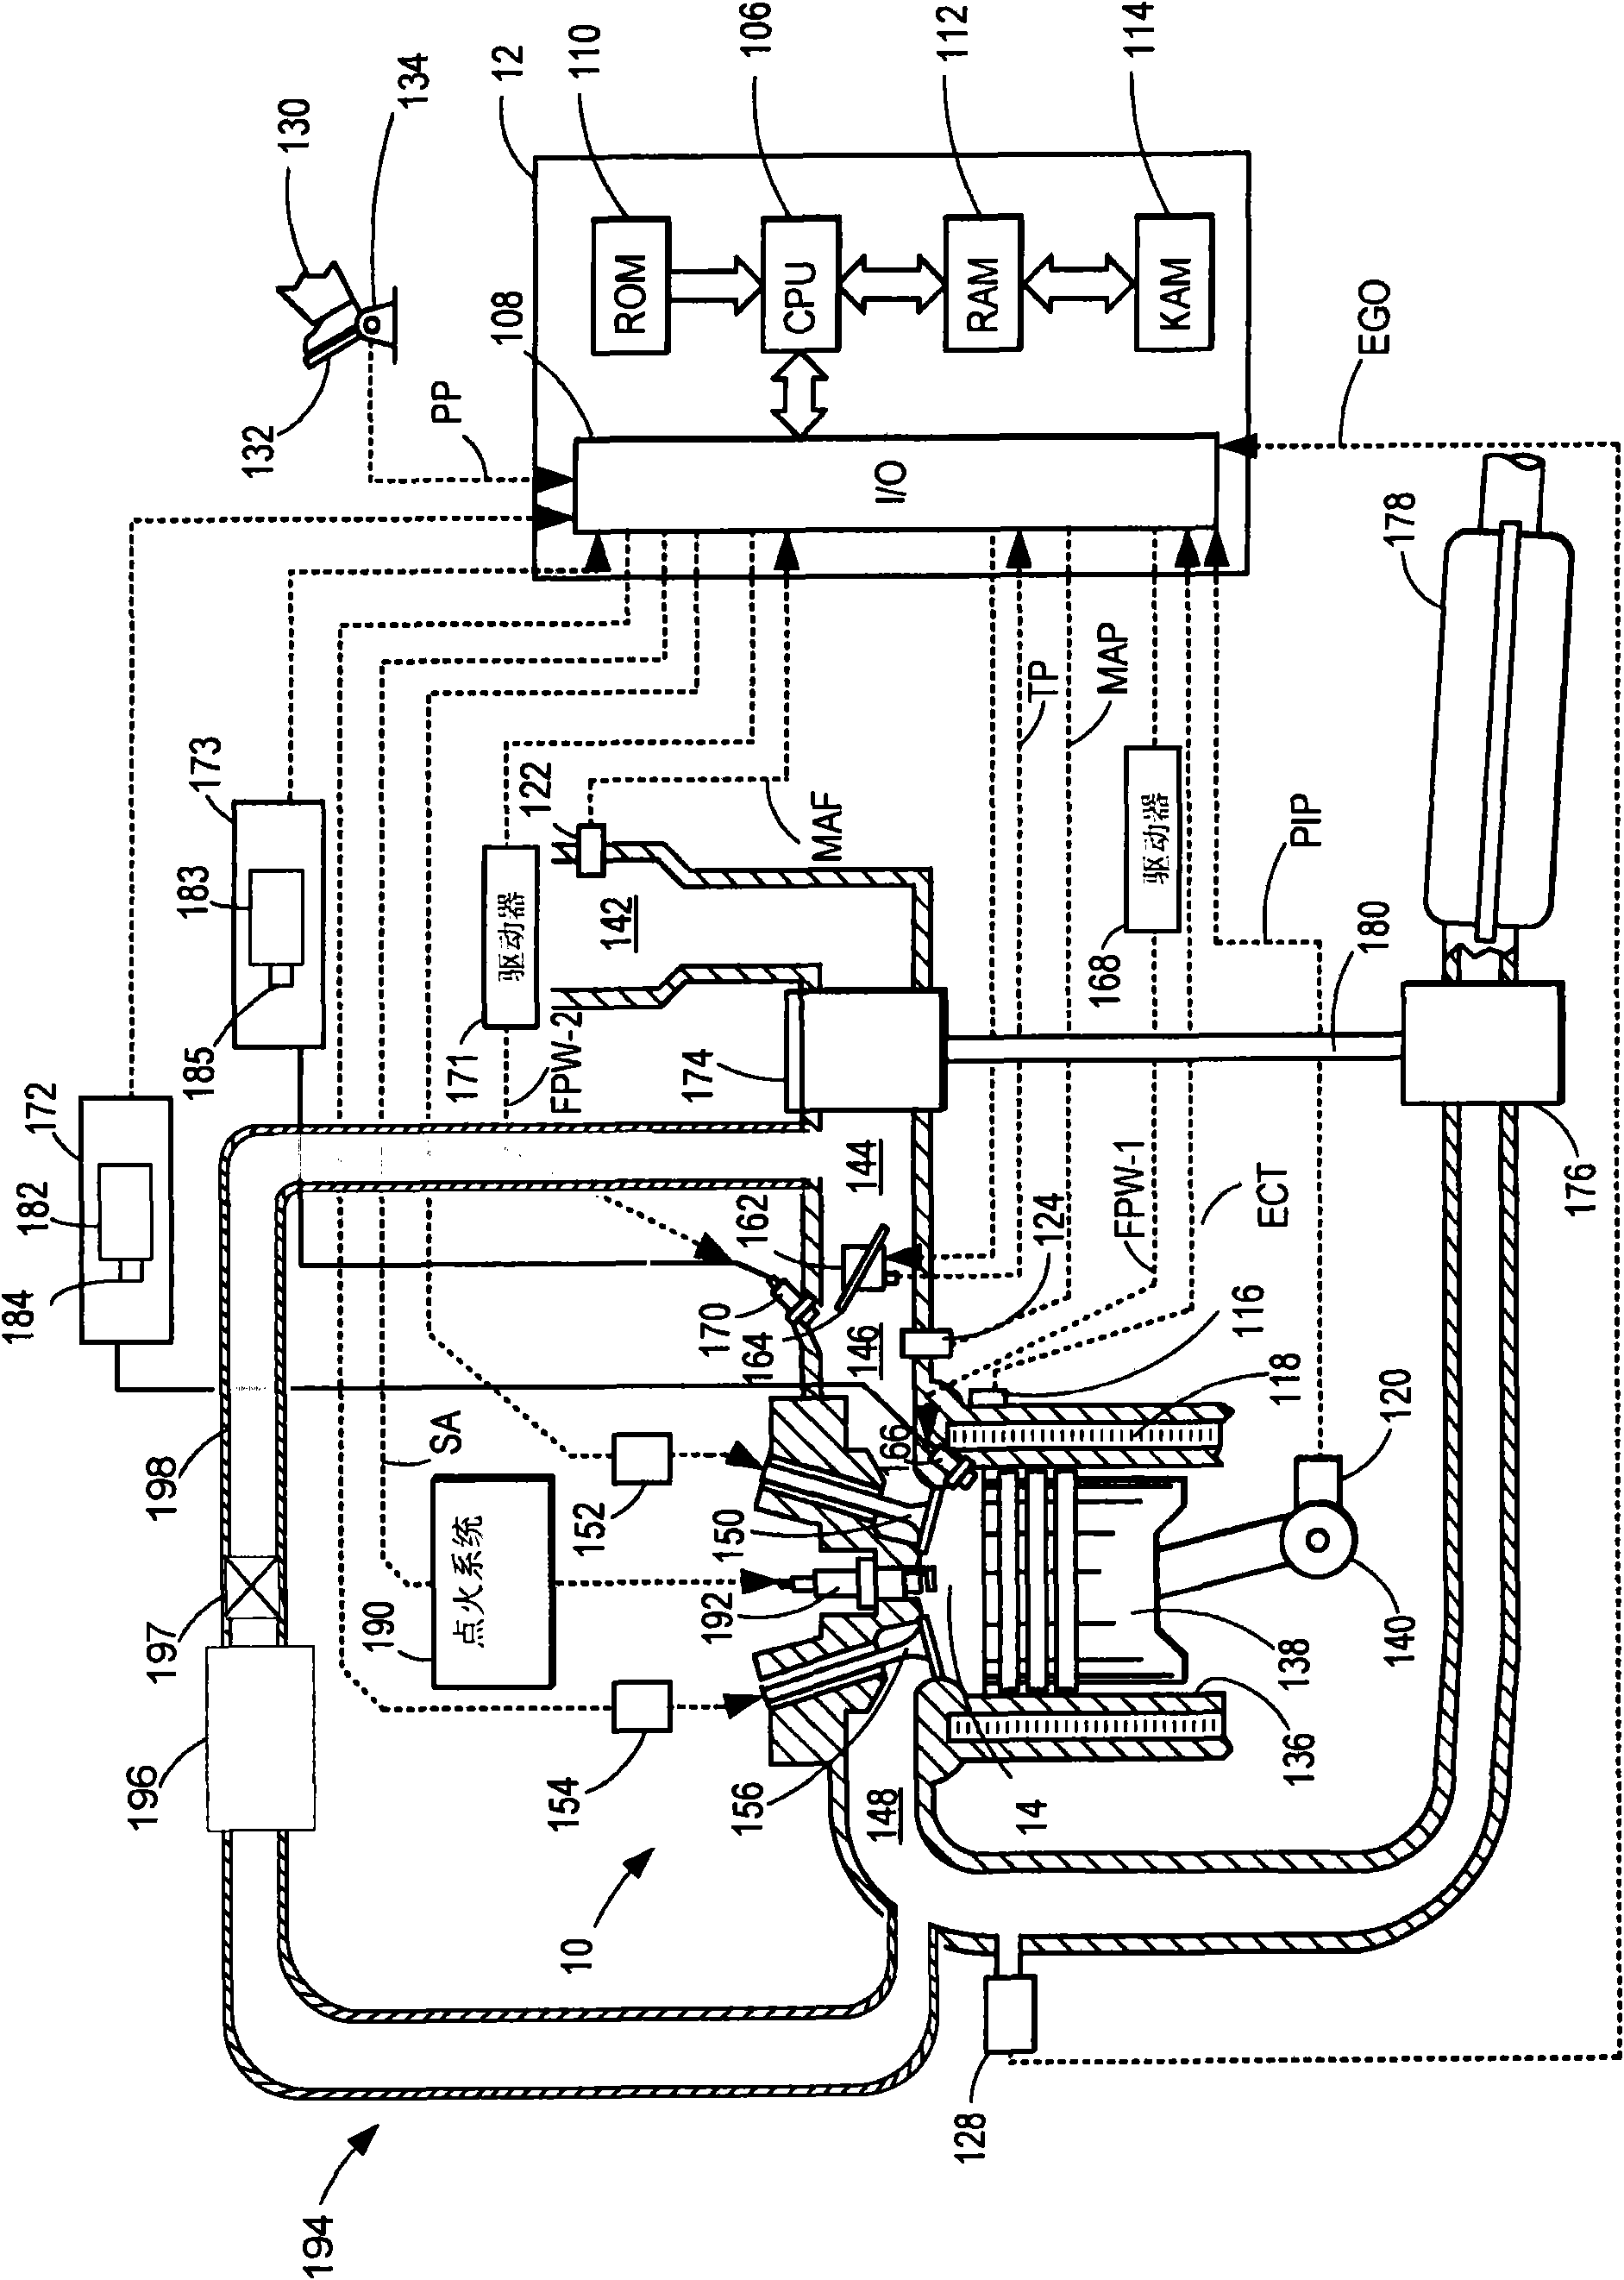 Engine starting control system and method